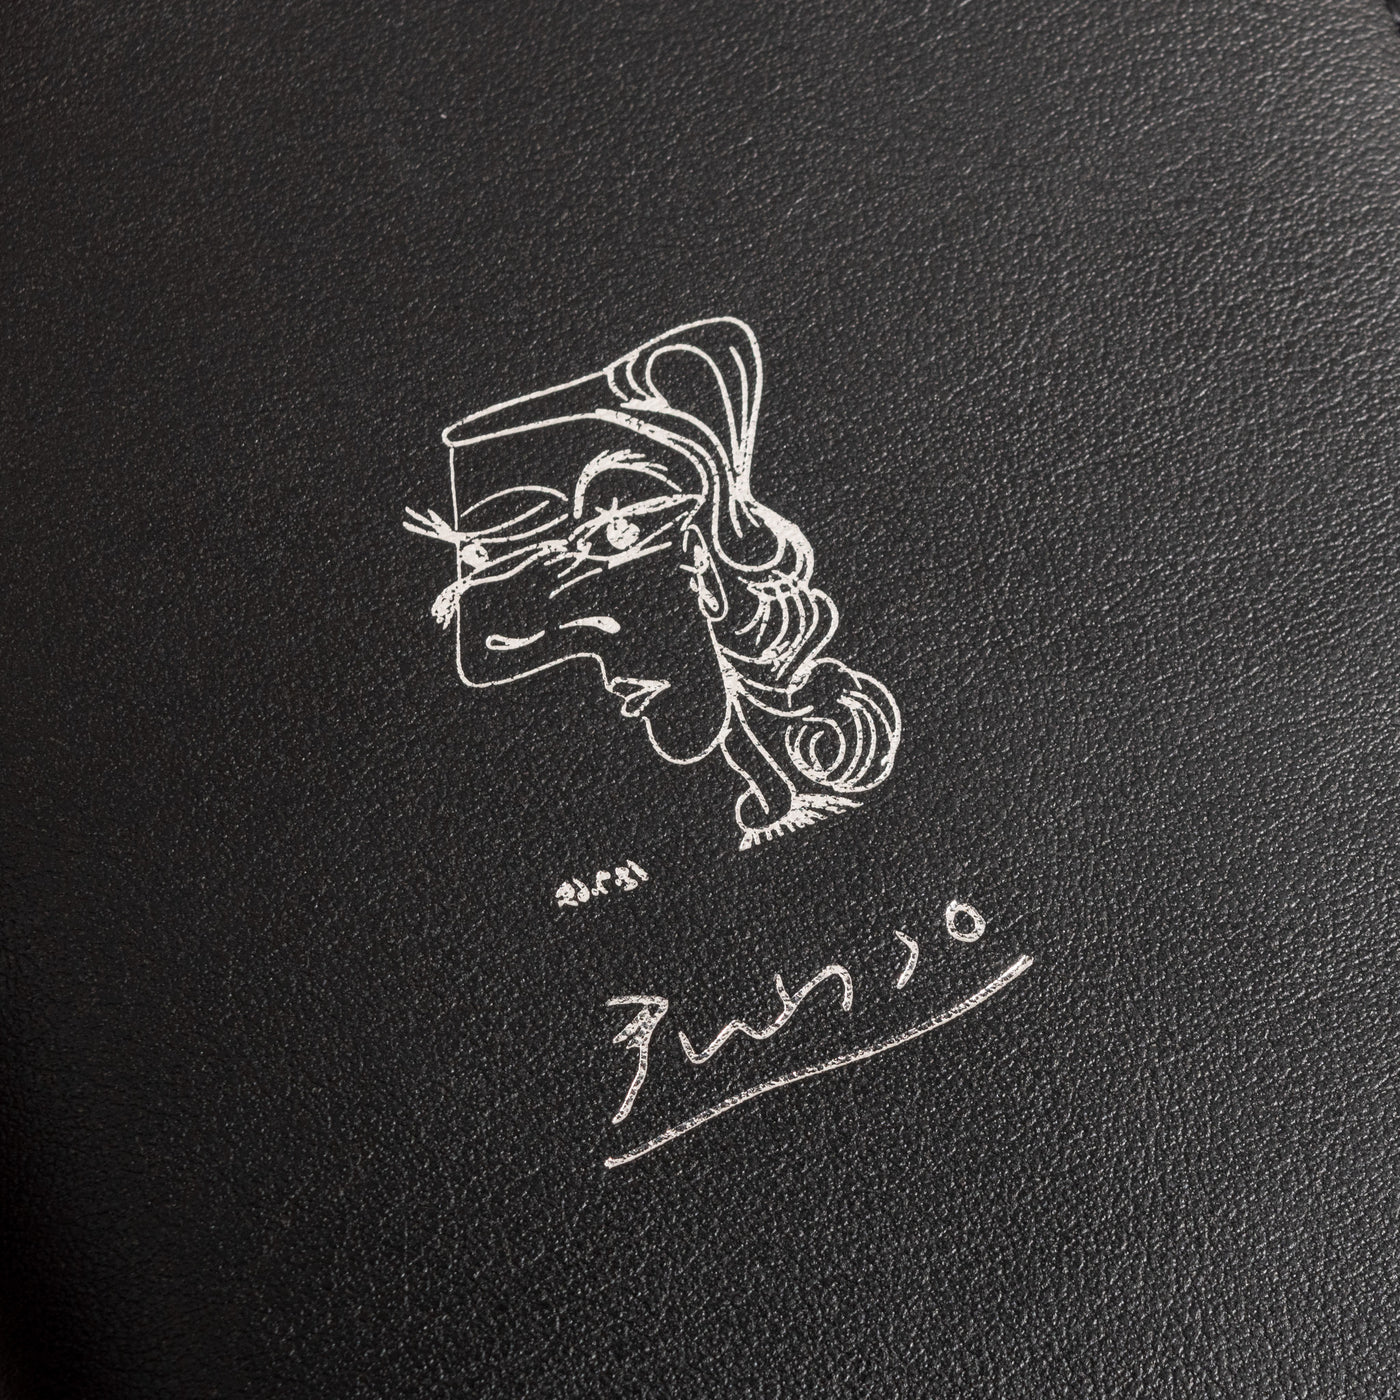 ST Dupont Picasso Special Edition Notebook artwork